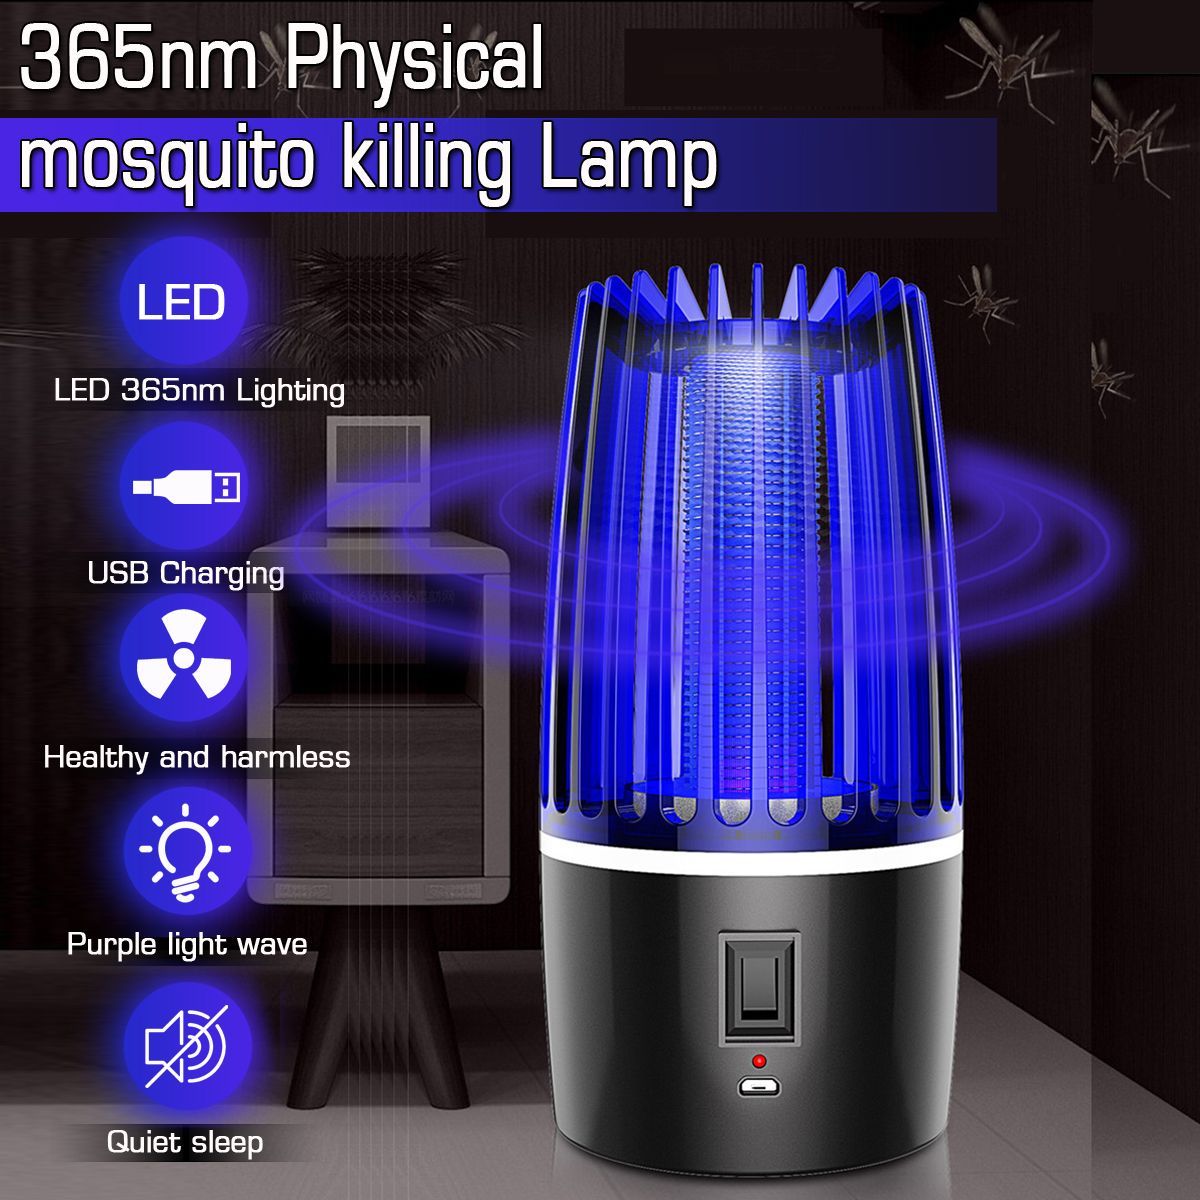 Rechargeable-5W-LED-Mosquito-Zapper-Killer-Fly-Insect-Bug-Trap-Lamp-Night-Light-DC5V-1668033